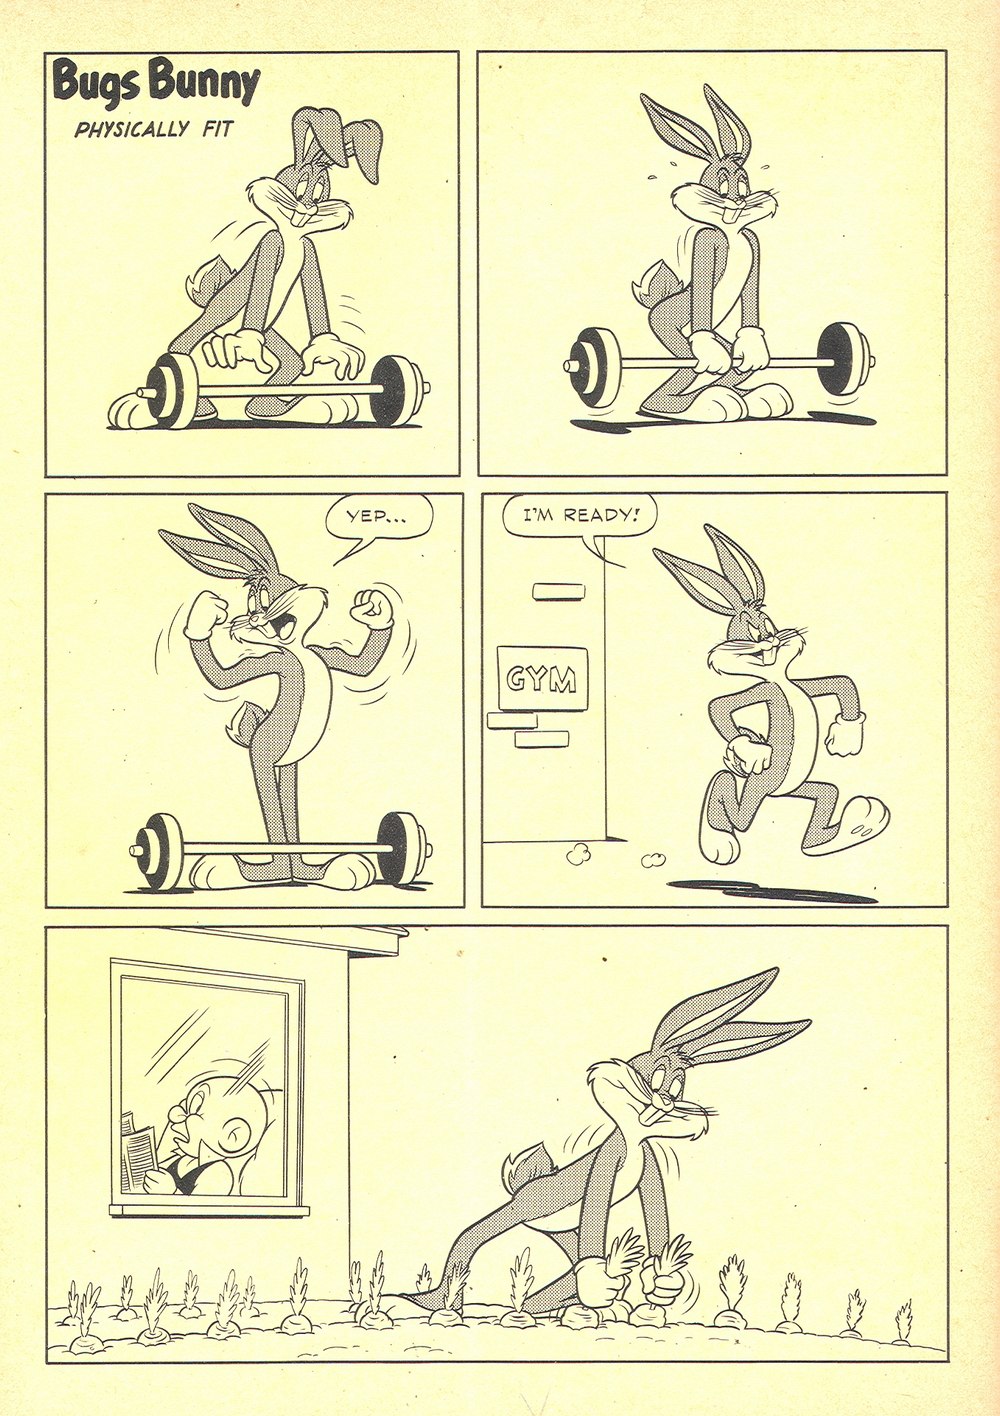 Bugs Bunny Issue 83 | Read Bugs Bunny Issue 83 comic online in high  quality. Read Full Comic online for free - Read comics online in high  quality .| READ COMIC ONLINE